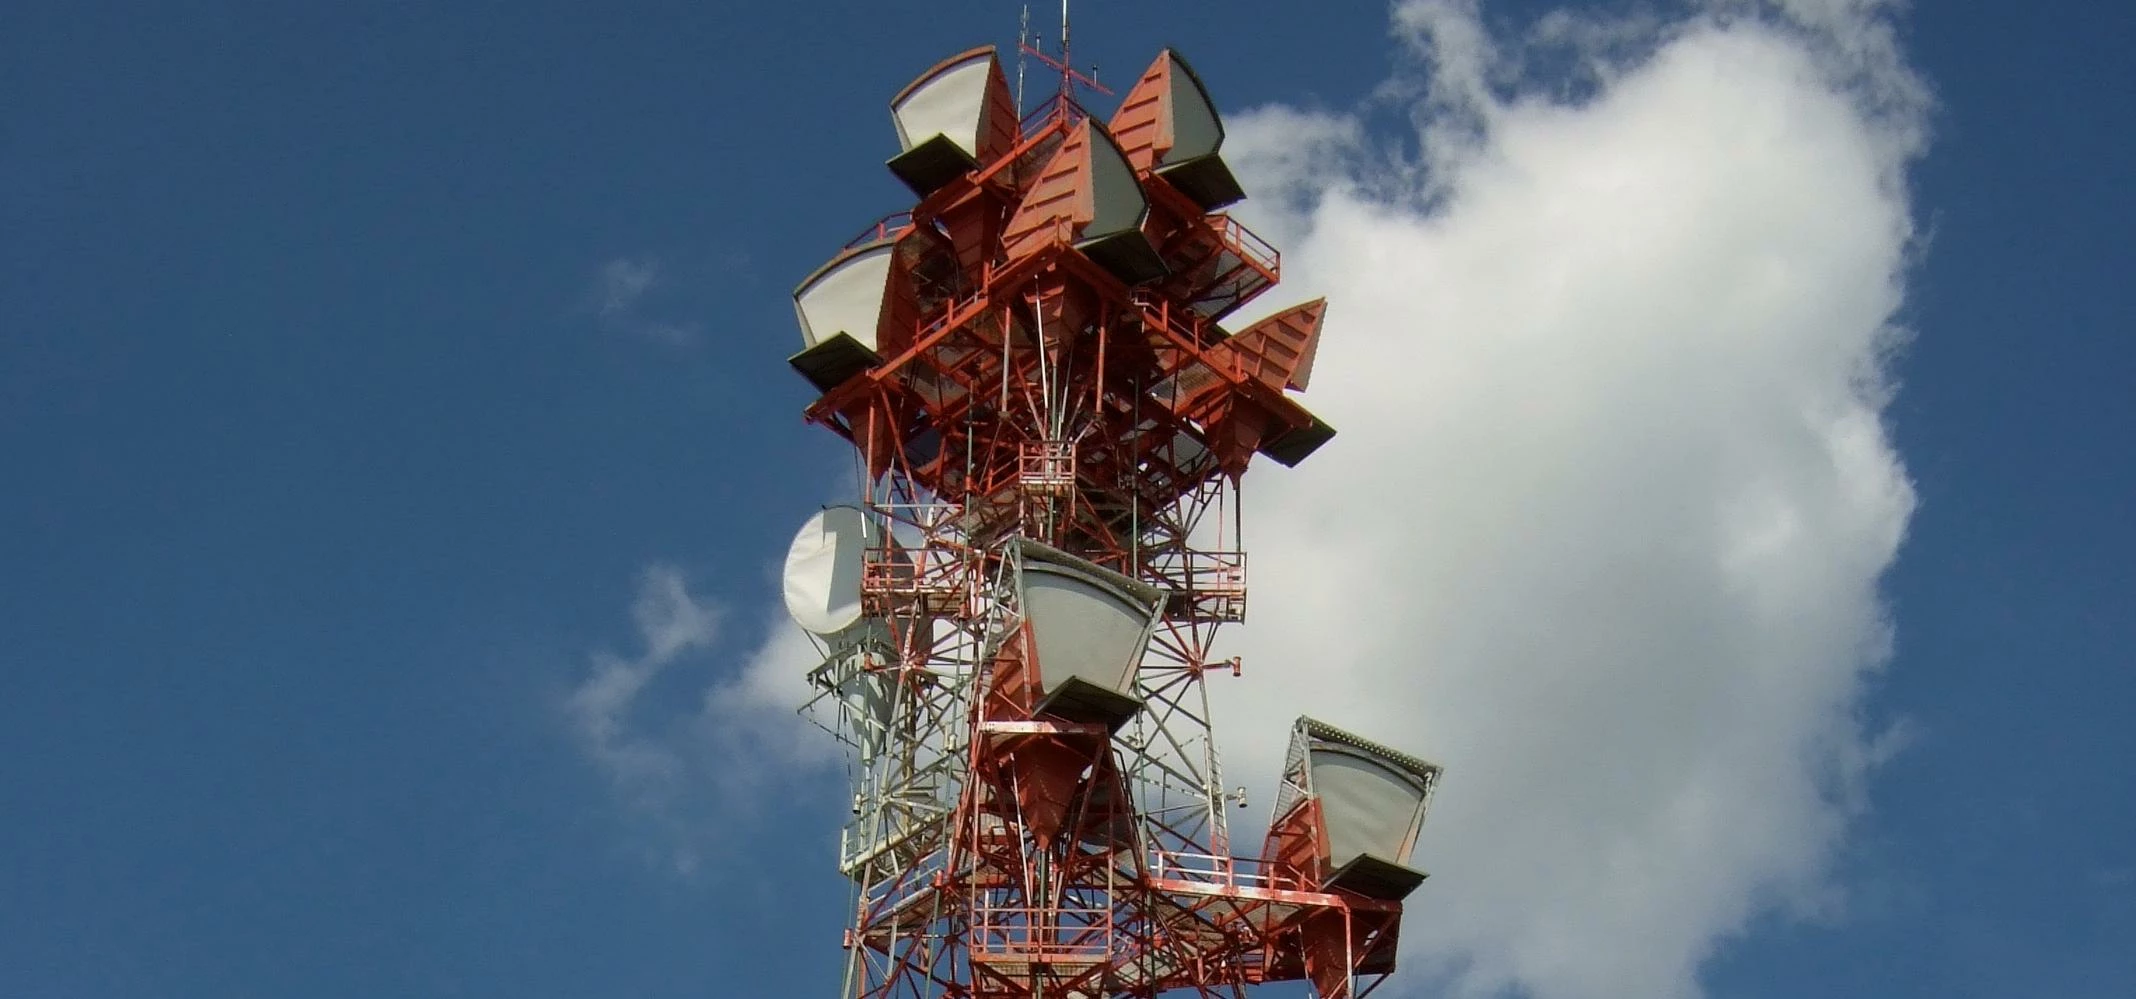 AT&T microwave tower